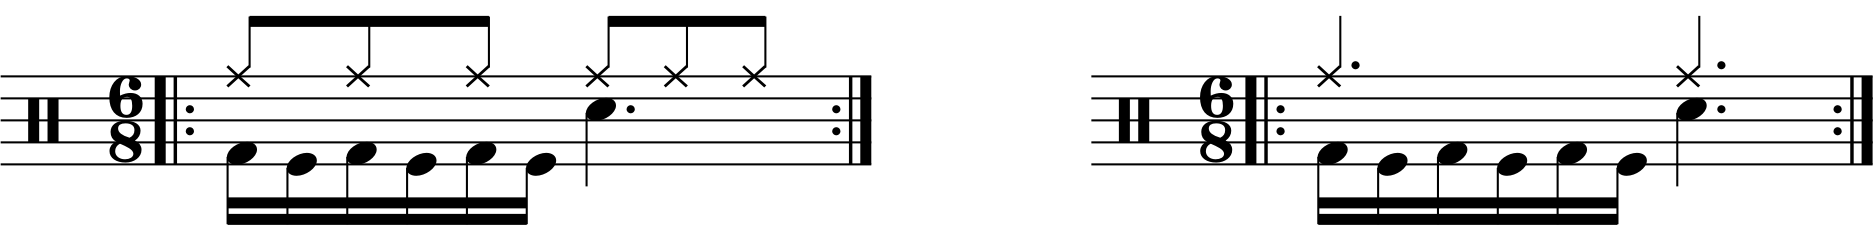 A 6/8 groove with sixteenth note kicks.